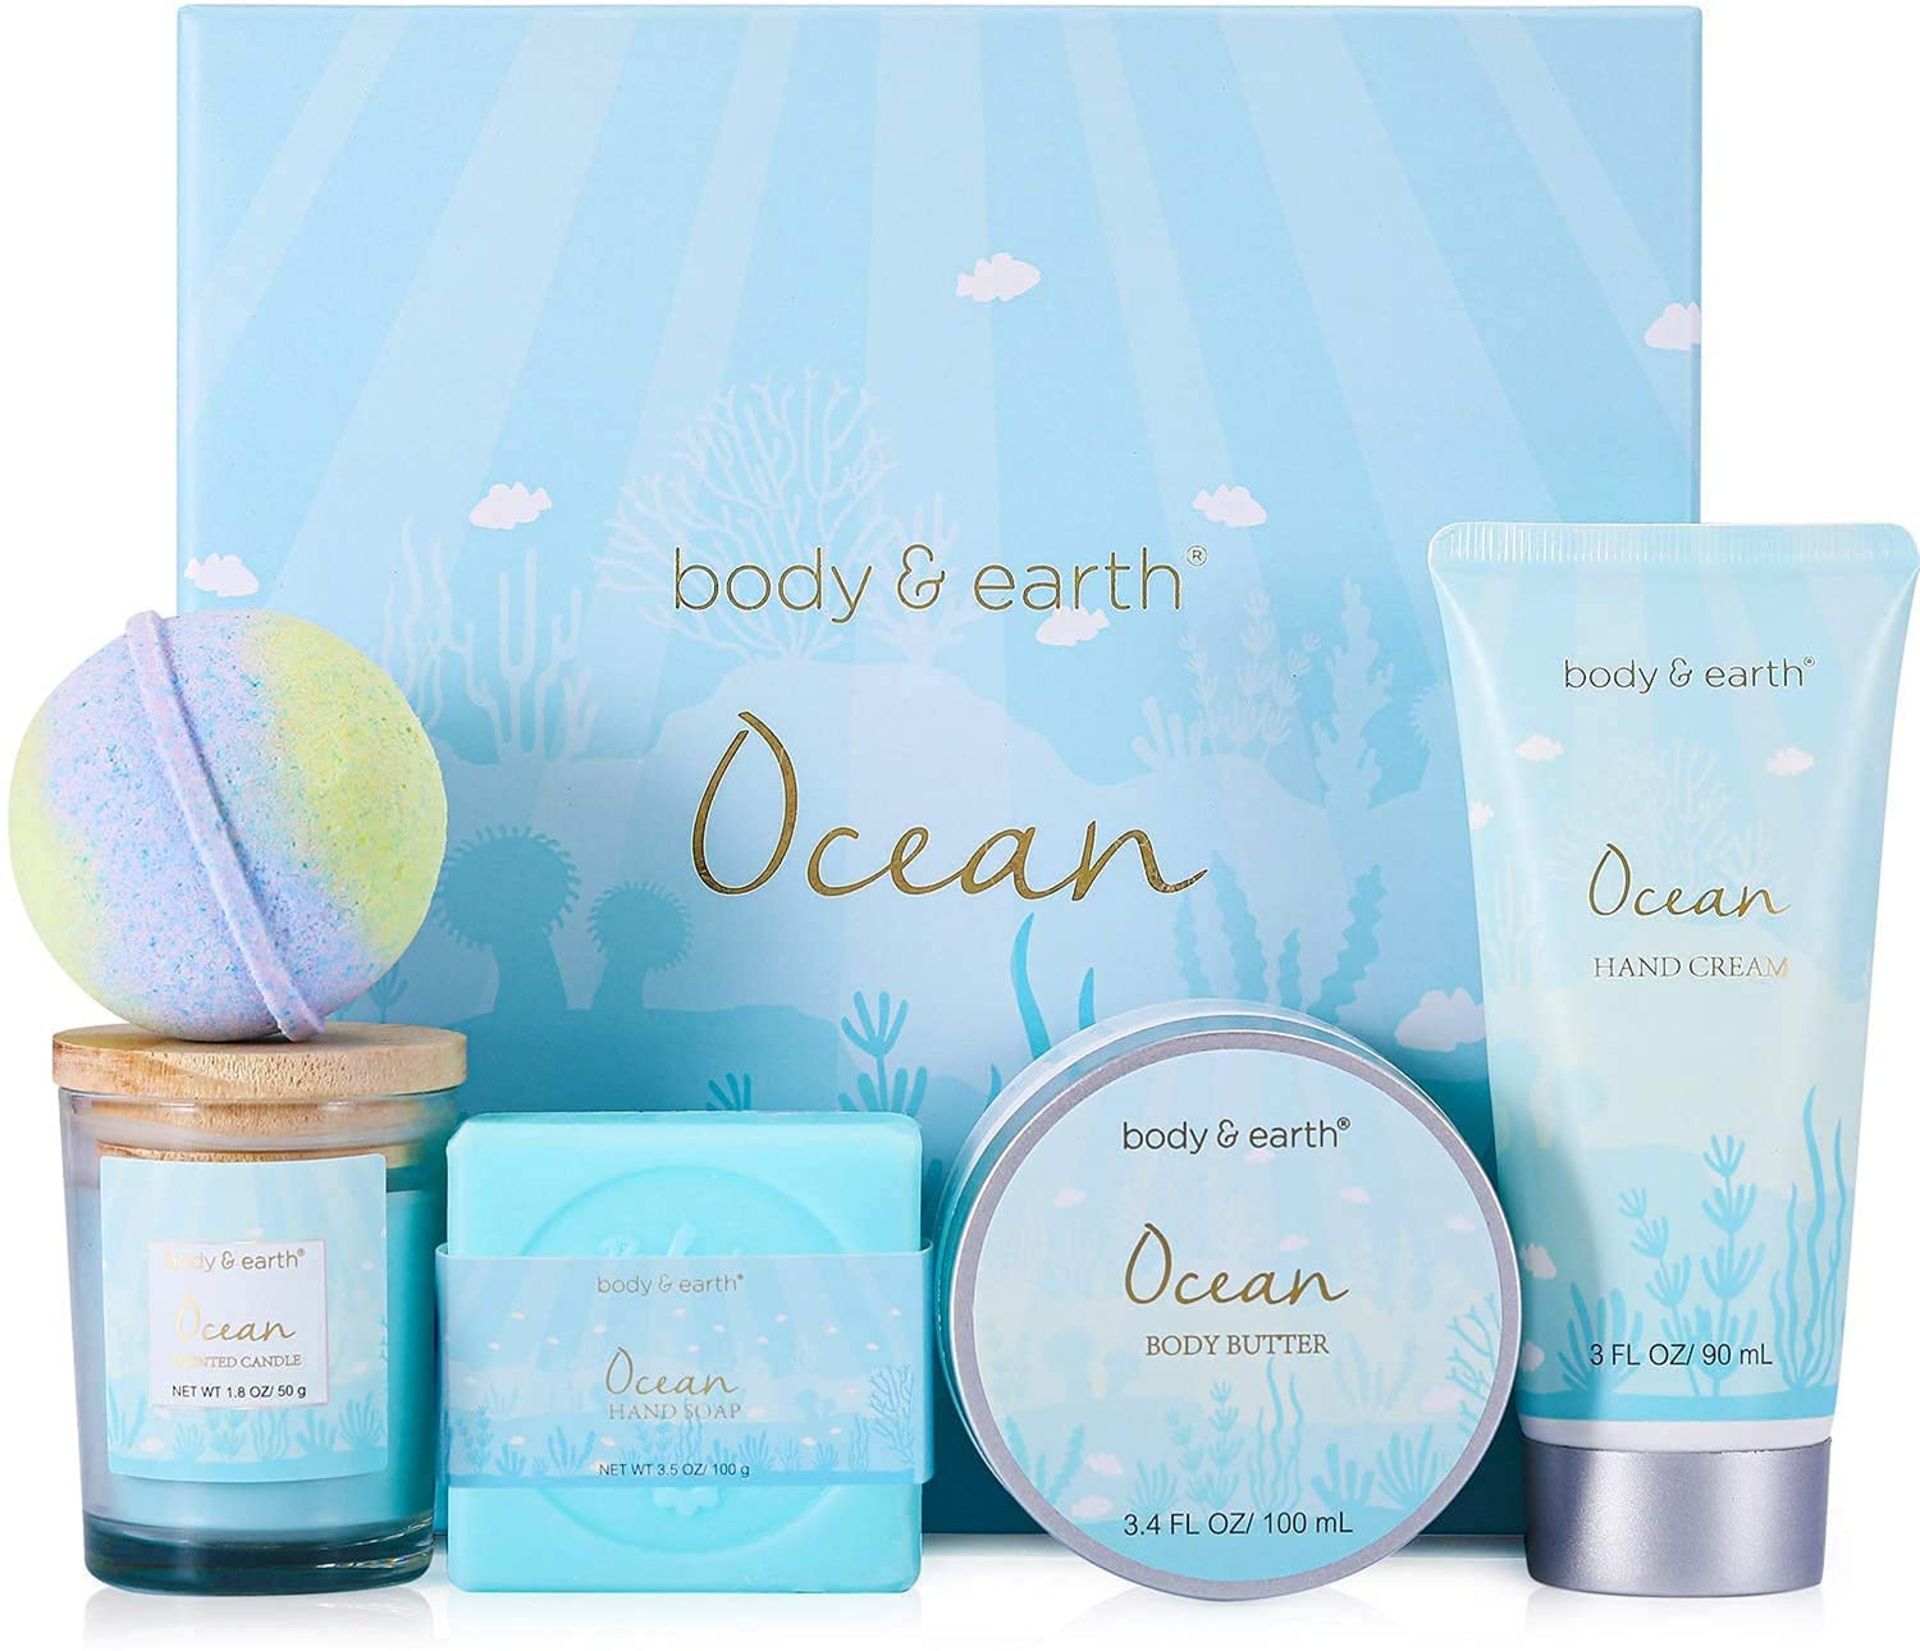 16 x NEW BOXED BODY & EARTH OCEAN 5 PIECE GIFT SETS. EACH SET INCLUDES: BATH BOMB, HAND SOAP, HAND